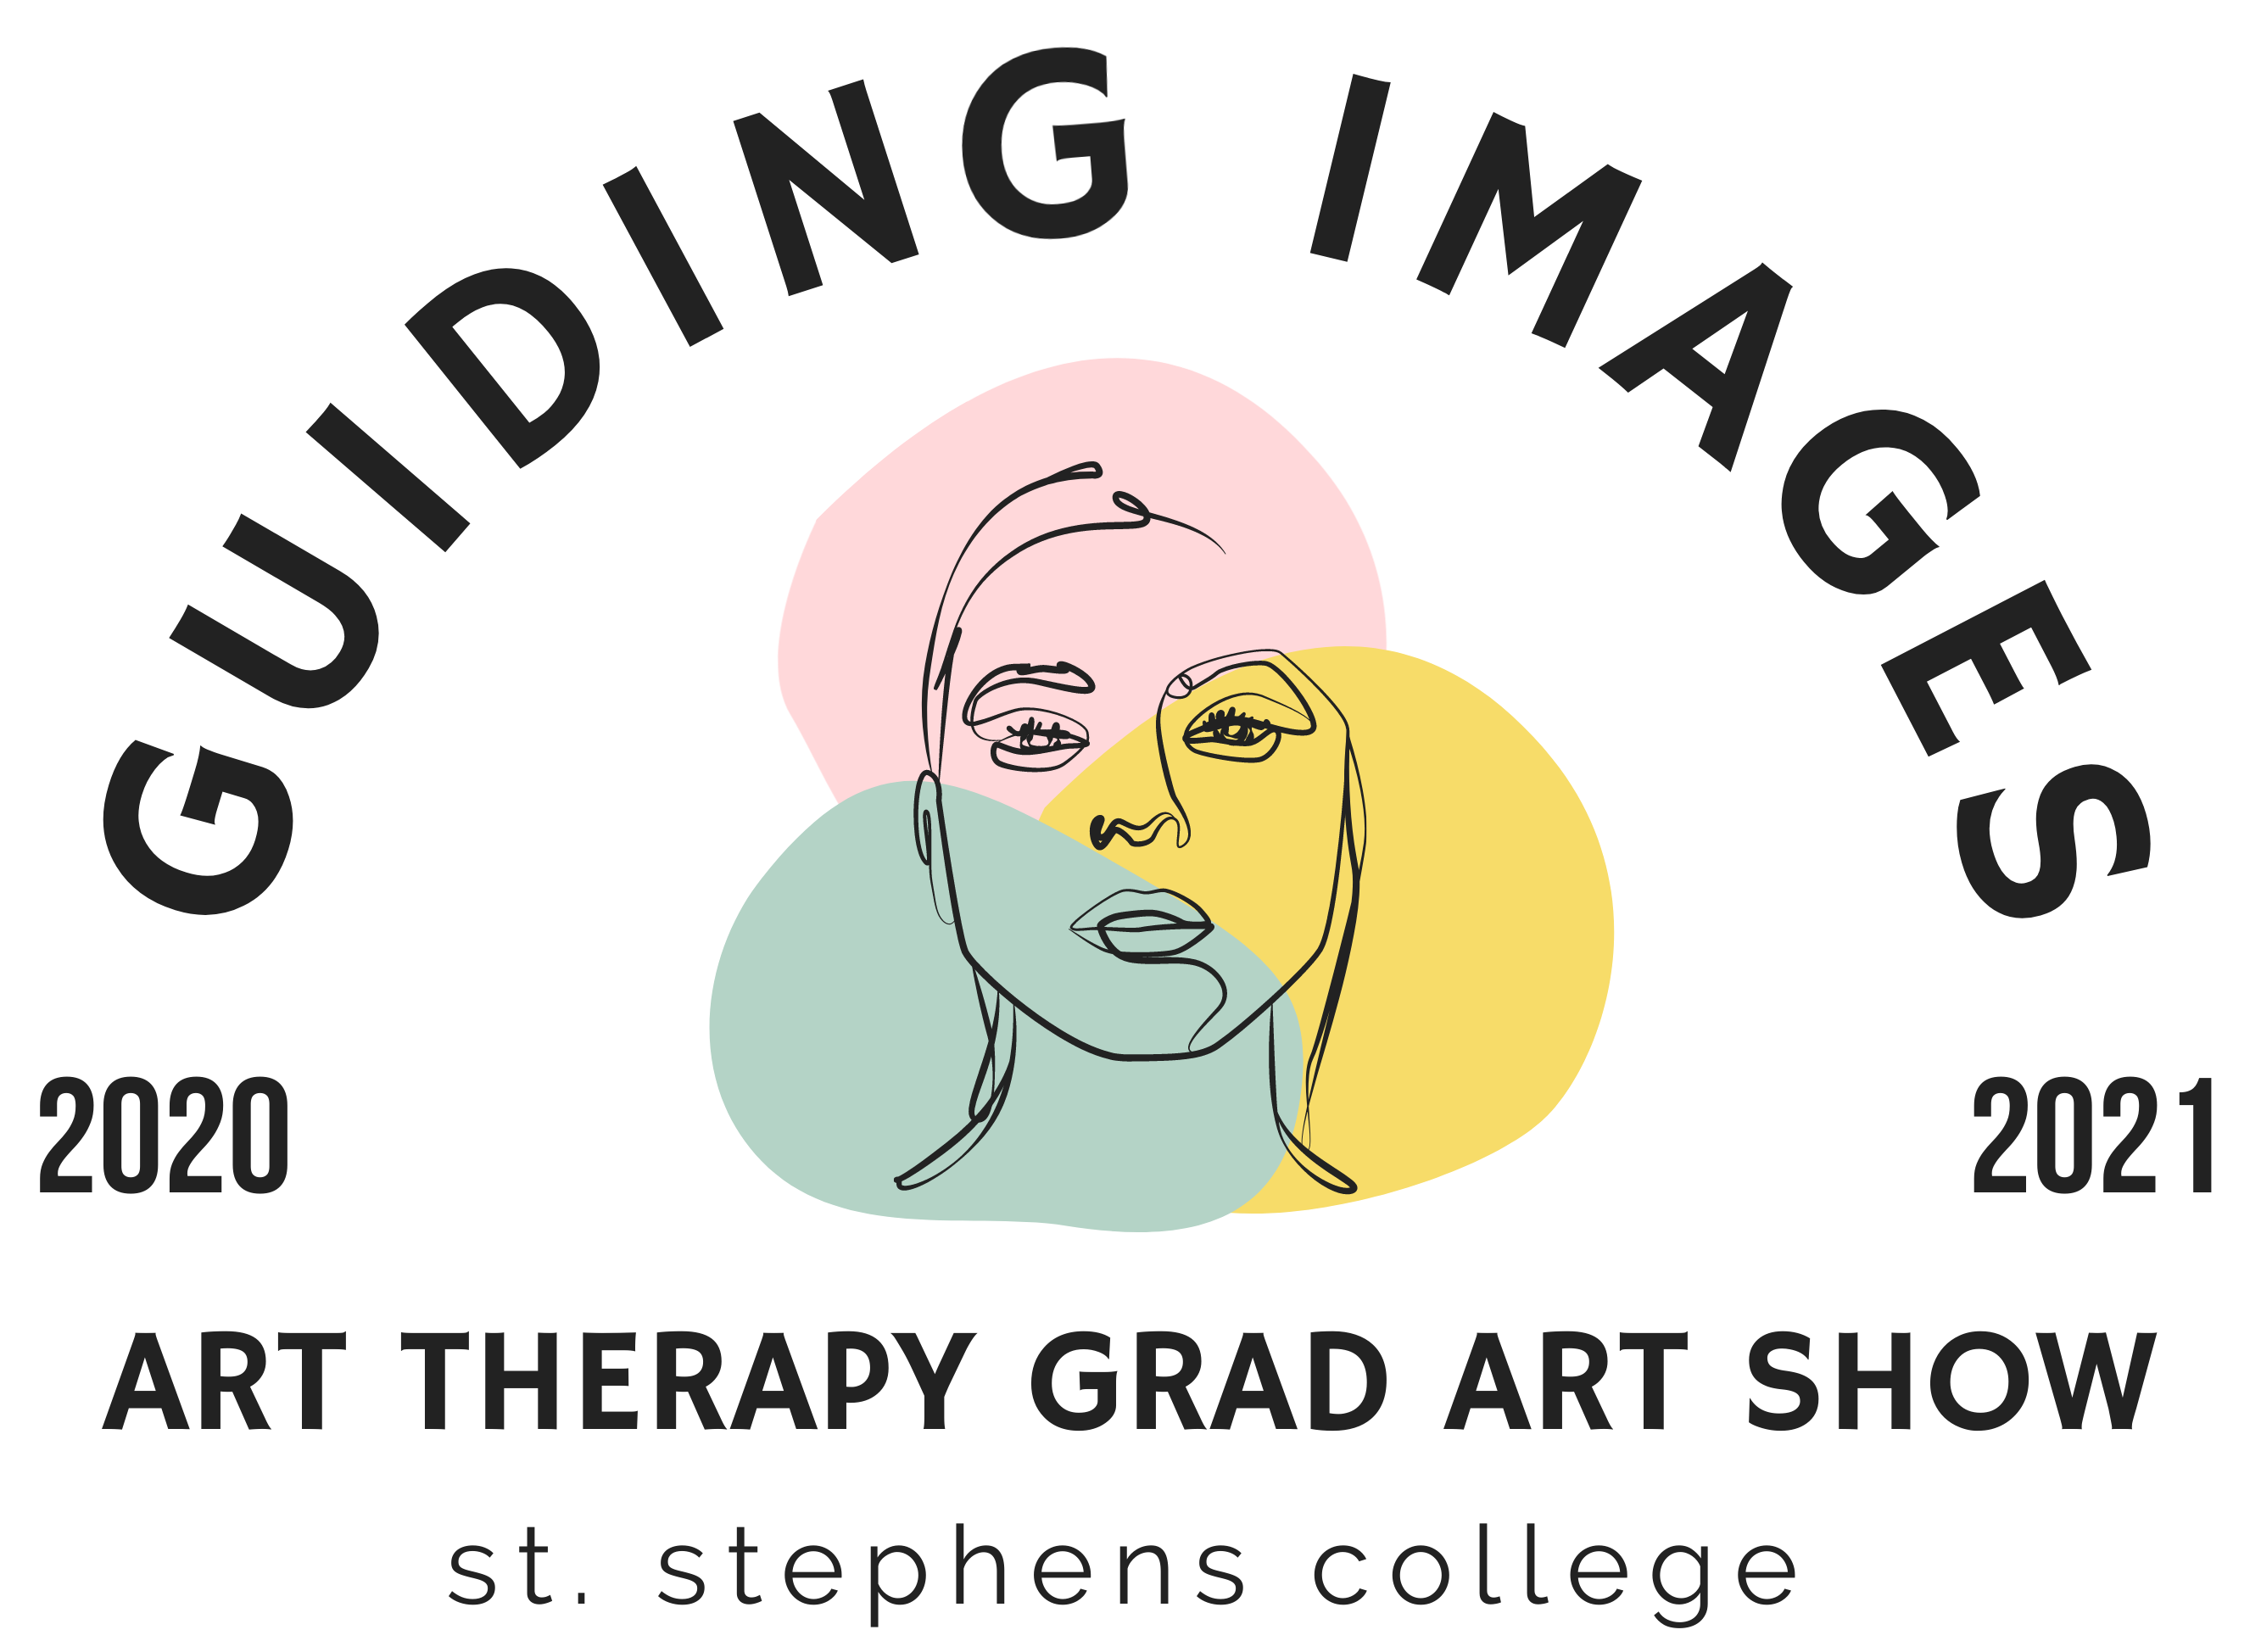 Guiding Images Art Therapy Grad Art Show